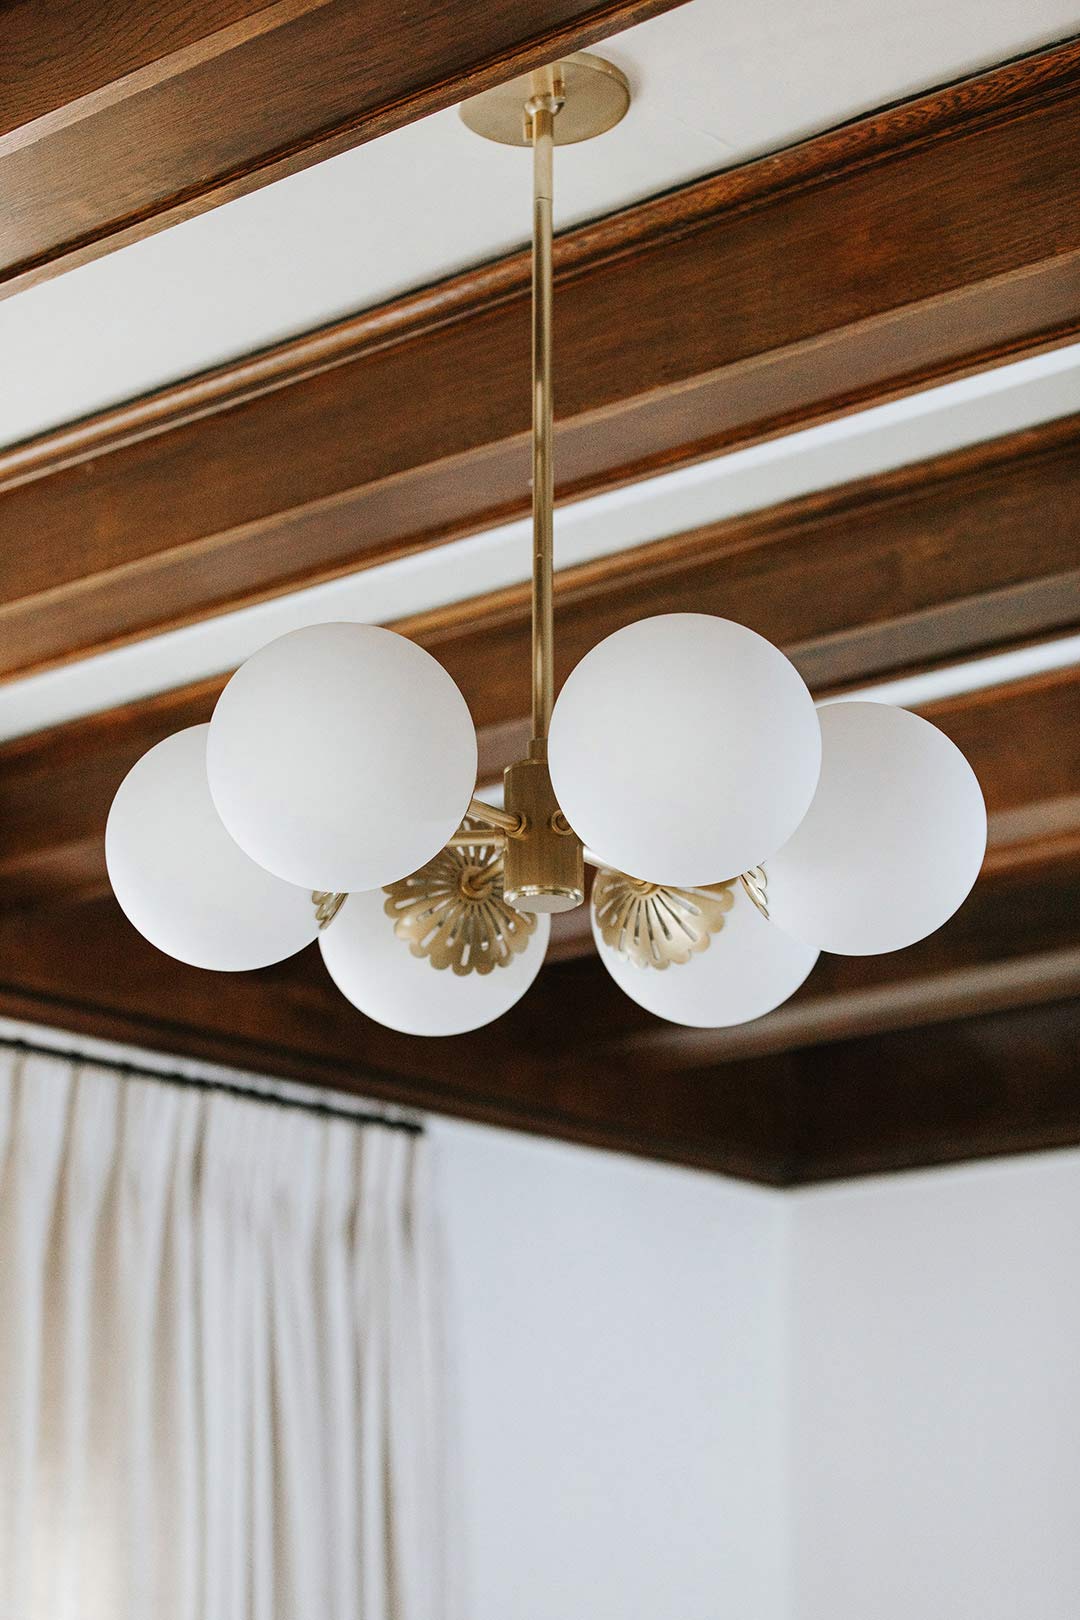 Detailed view of a 6 Light round globe, modern yet traditional light fixture compliment the decor theme of this victorian remodel.